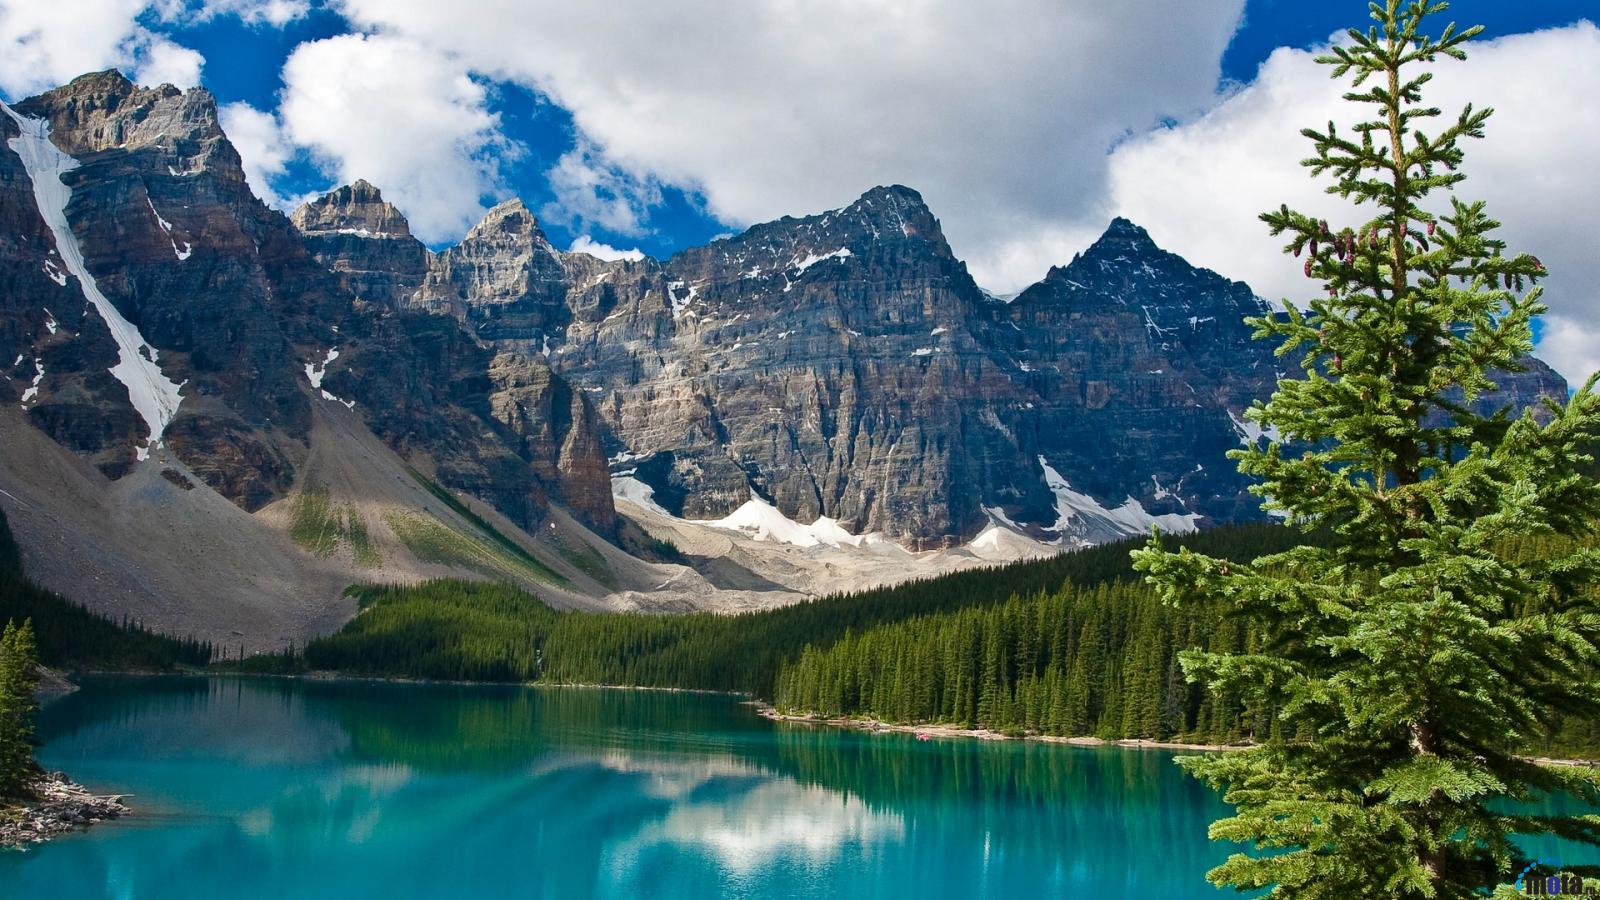 Desktop wallpapers Blue lake and rocky mountains